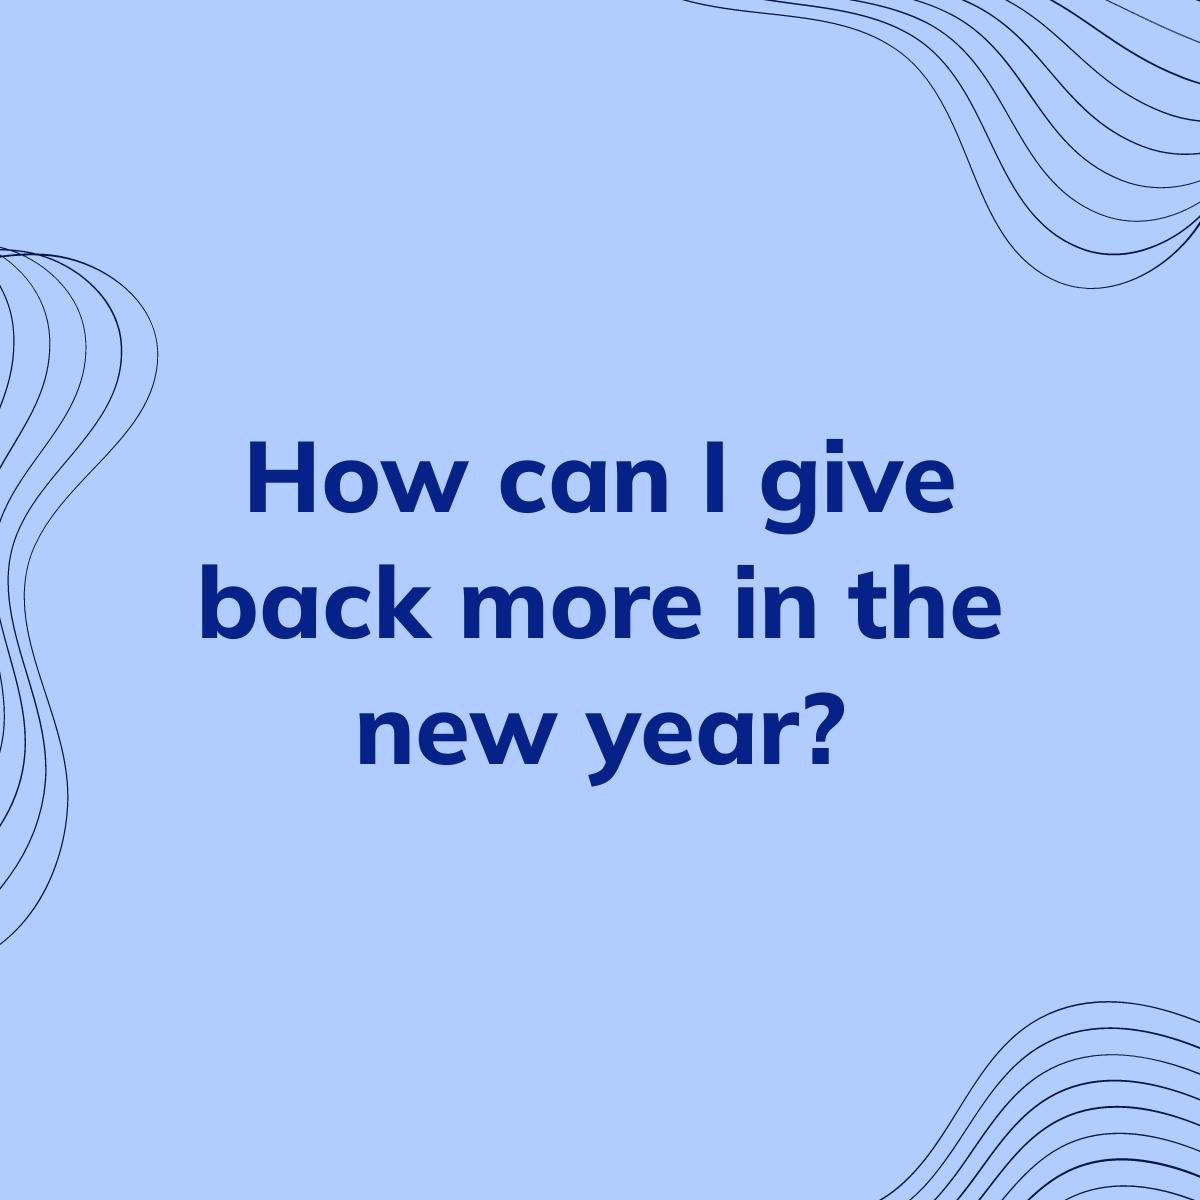 Journal Prompt: How can I give back more in the new year?